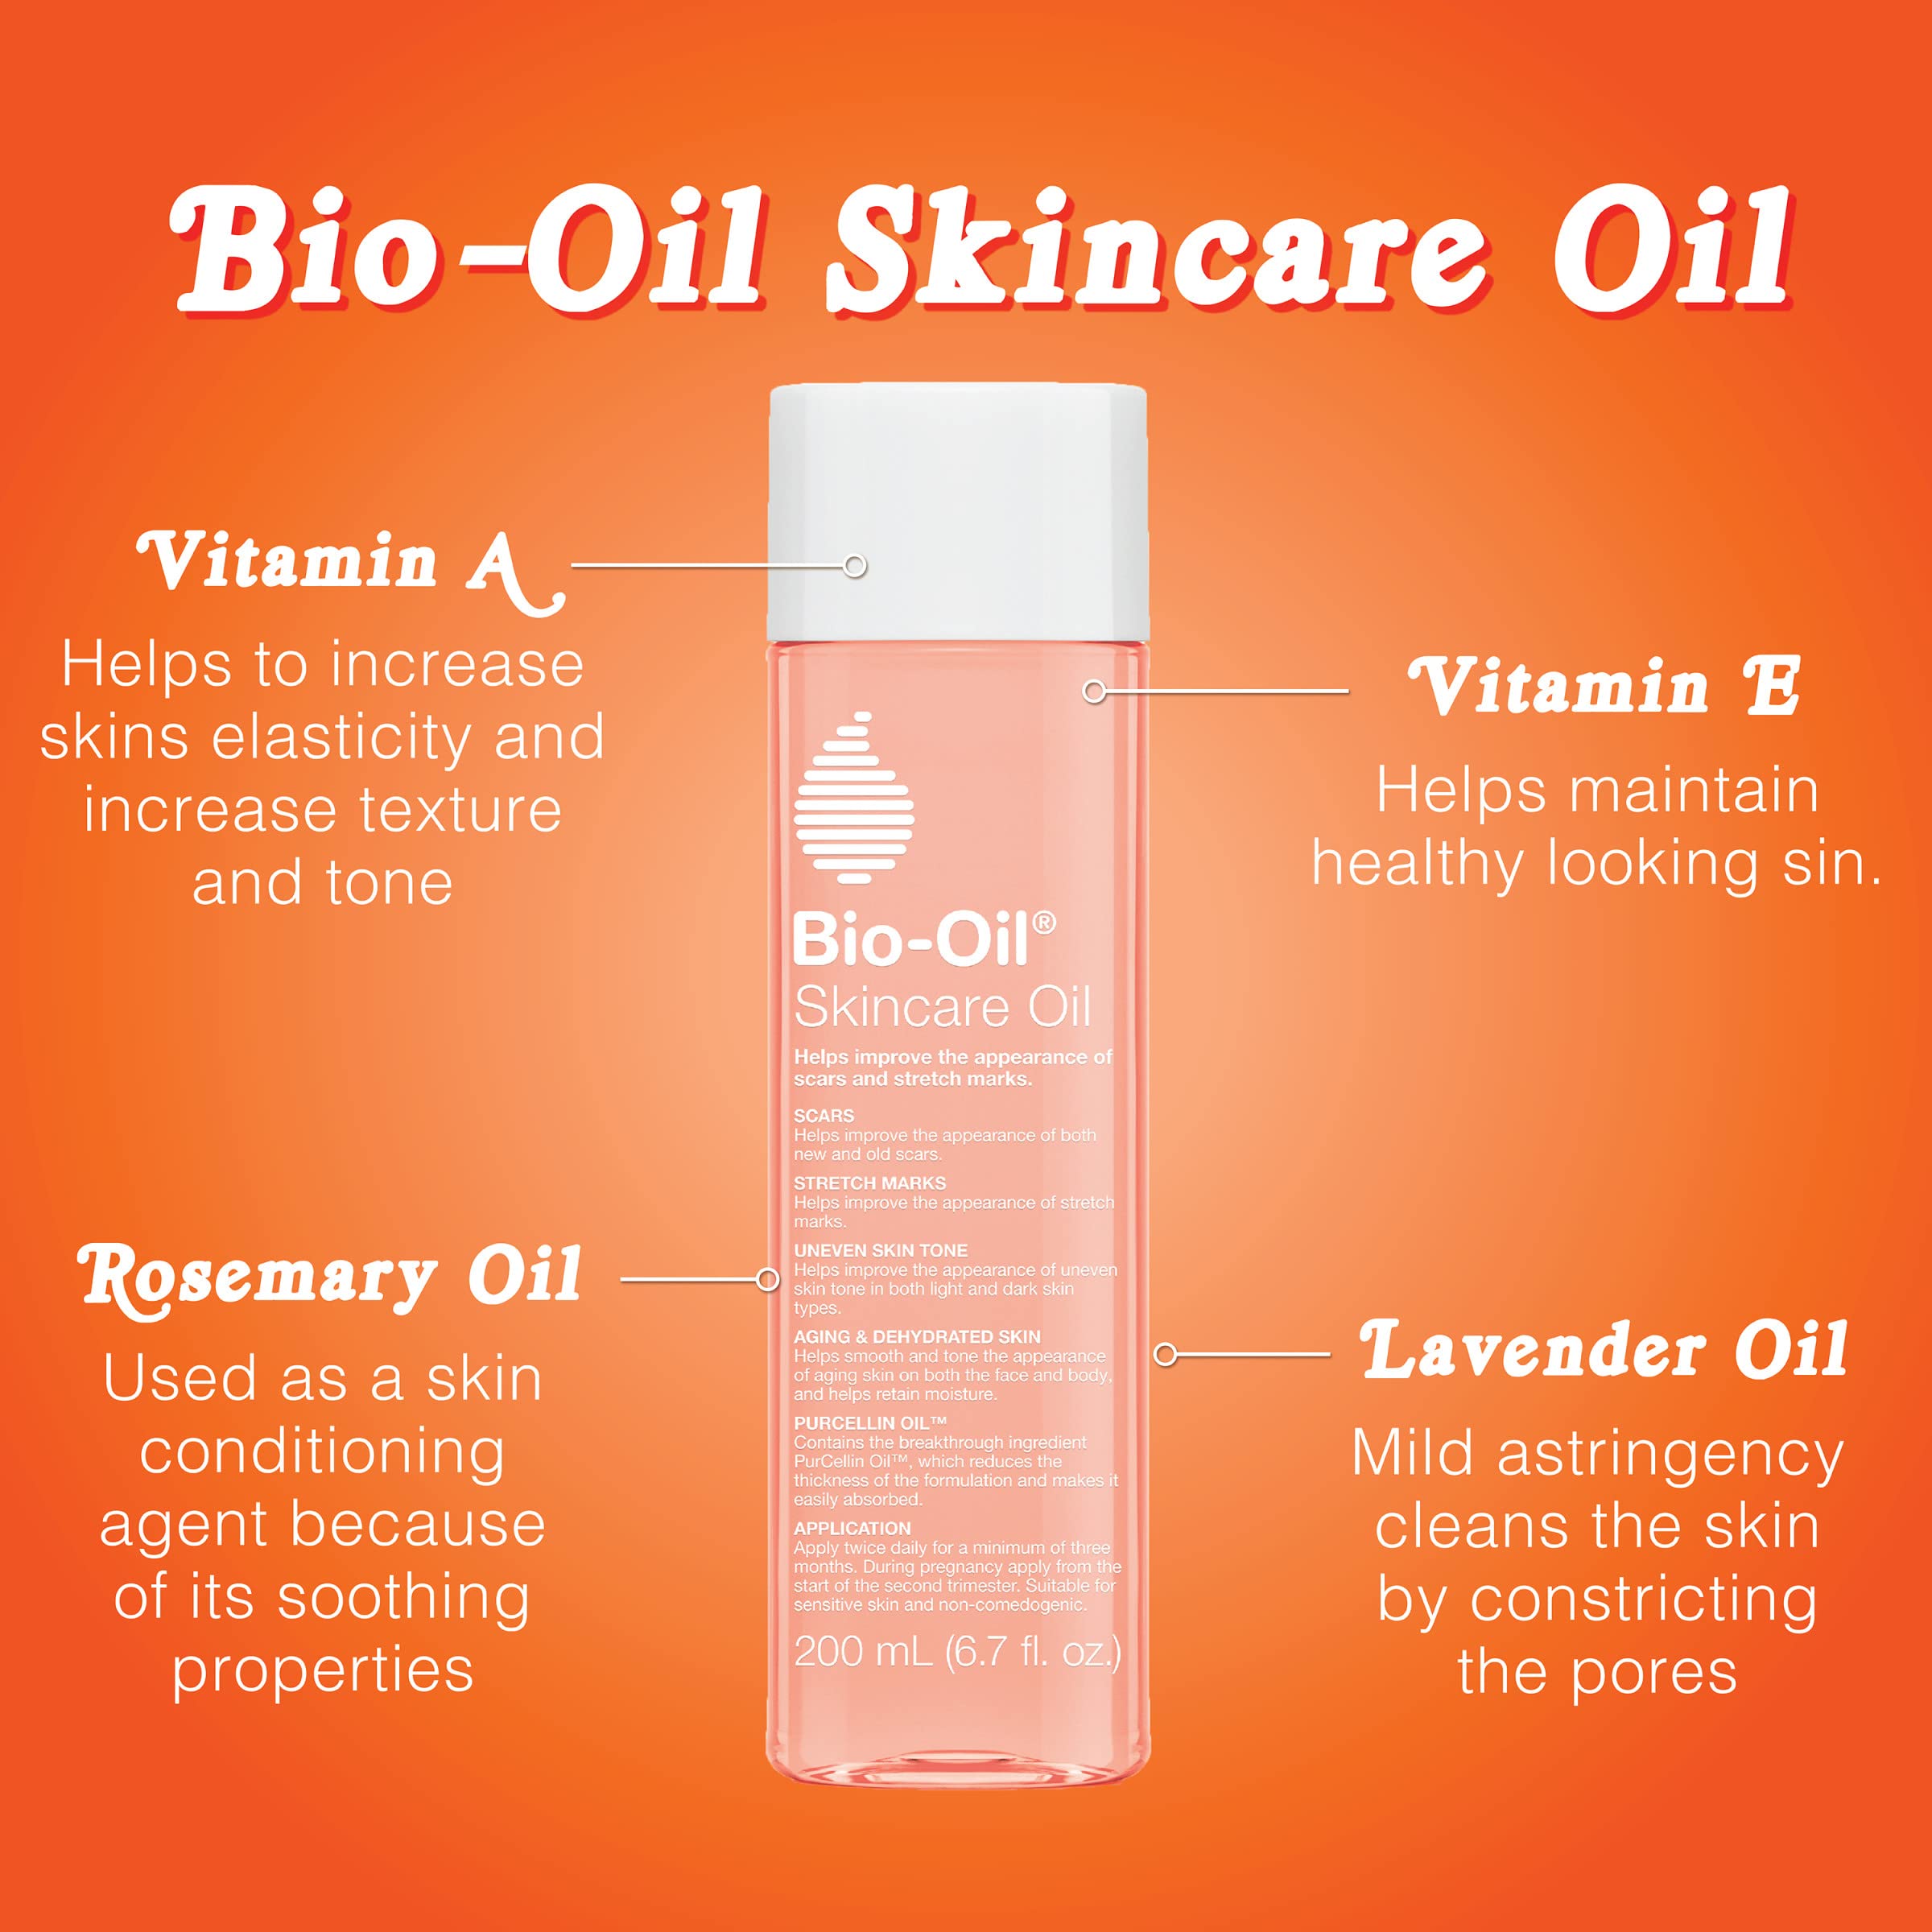 Bio-Oil Skincare Moisturizer with Vitamin E, for Scars and Stretchmarks, Face Serum and Body Moisturizer for Dry Skin, Non-Greasy, Dermatologist Recommended, Non-Comedogenic, with Vitamin A, 6.7 oz